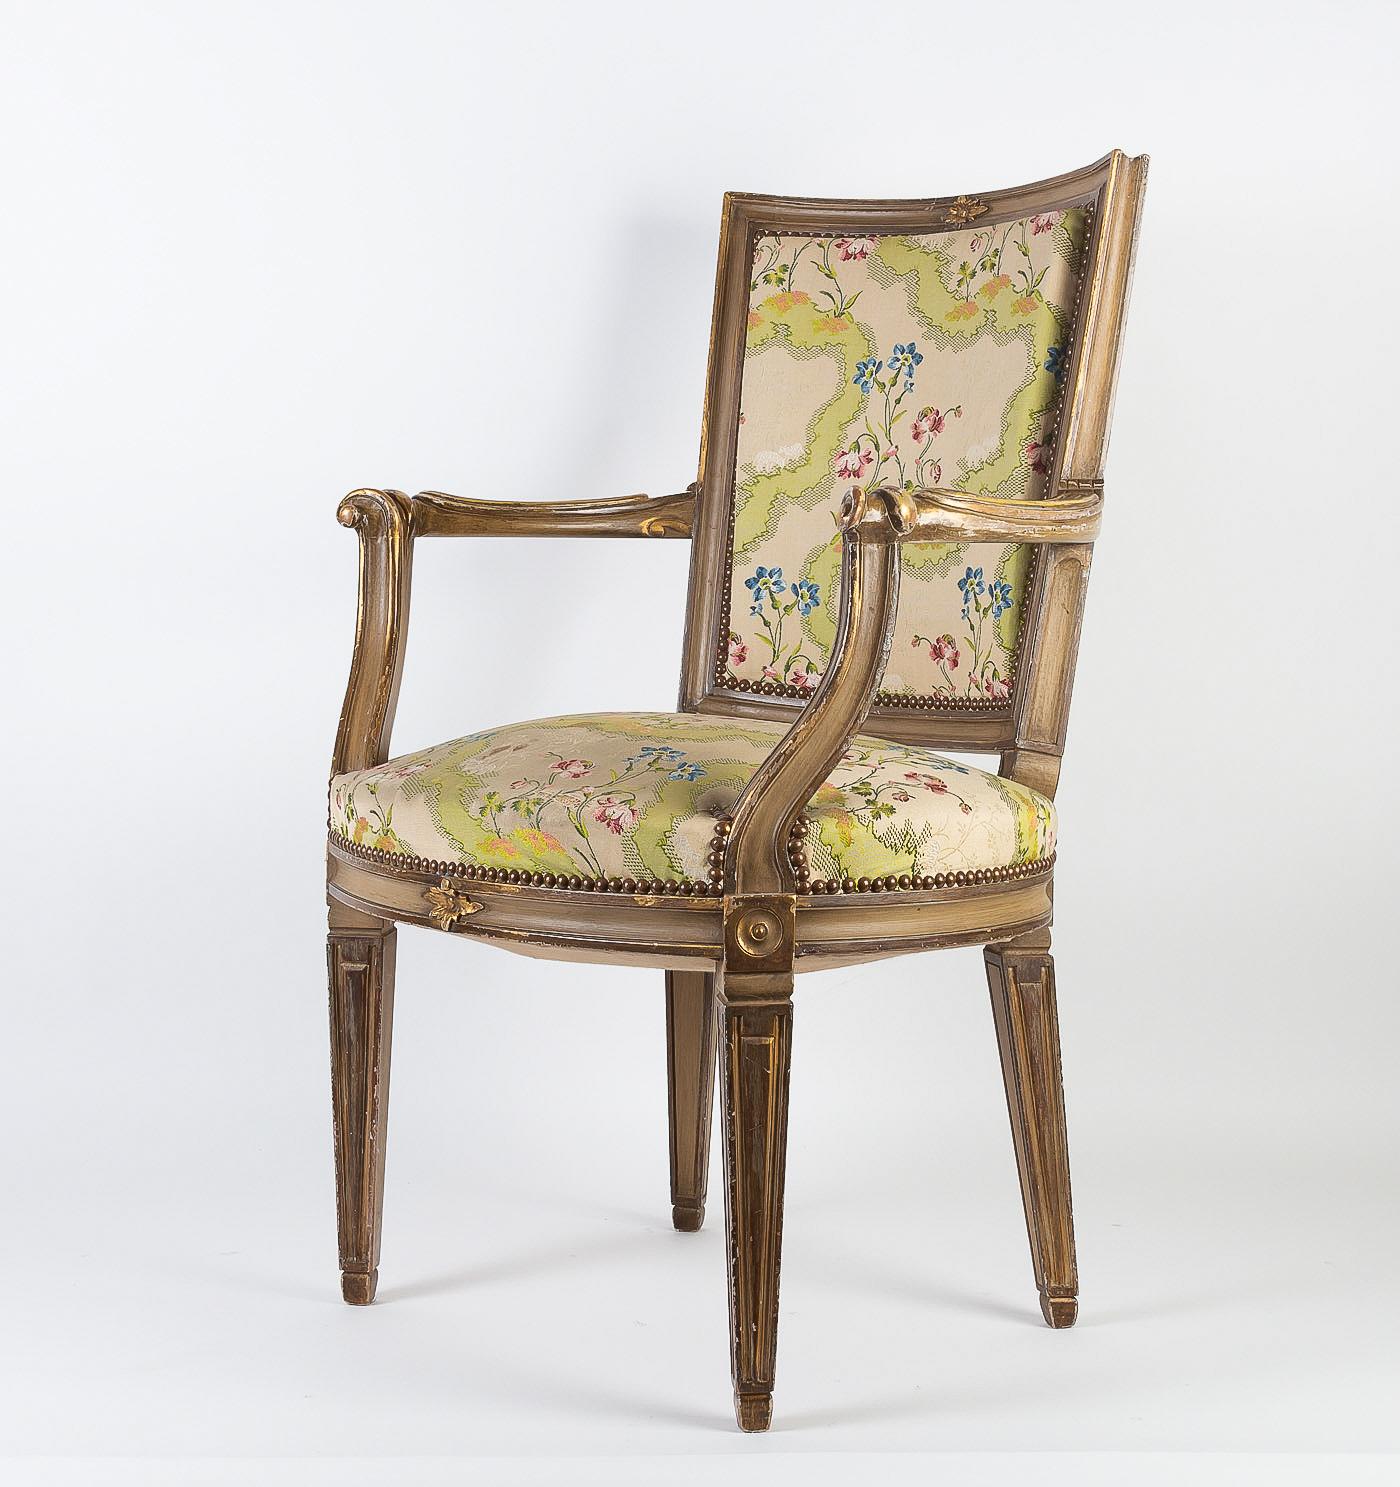 20th Century Restaurant The 1728, a Set of Six Armchairs in the Style of 18th Century For Sale